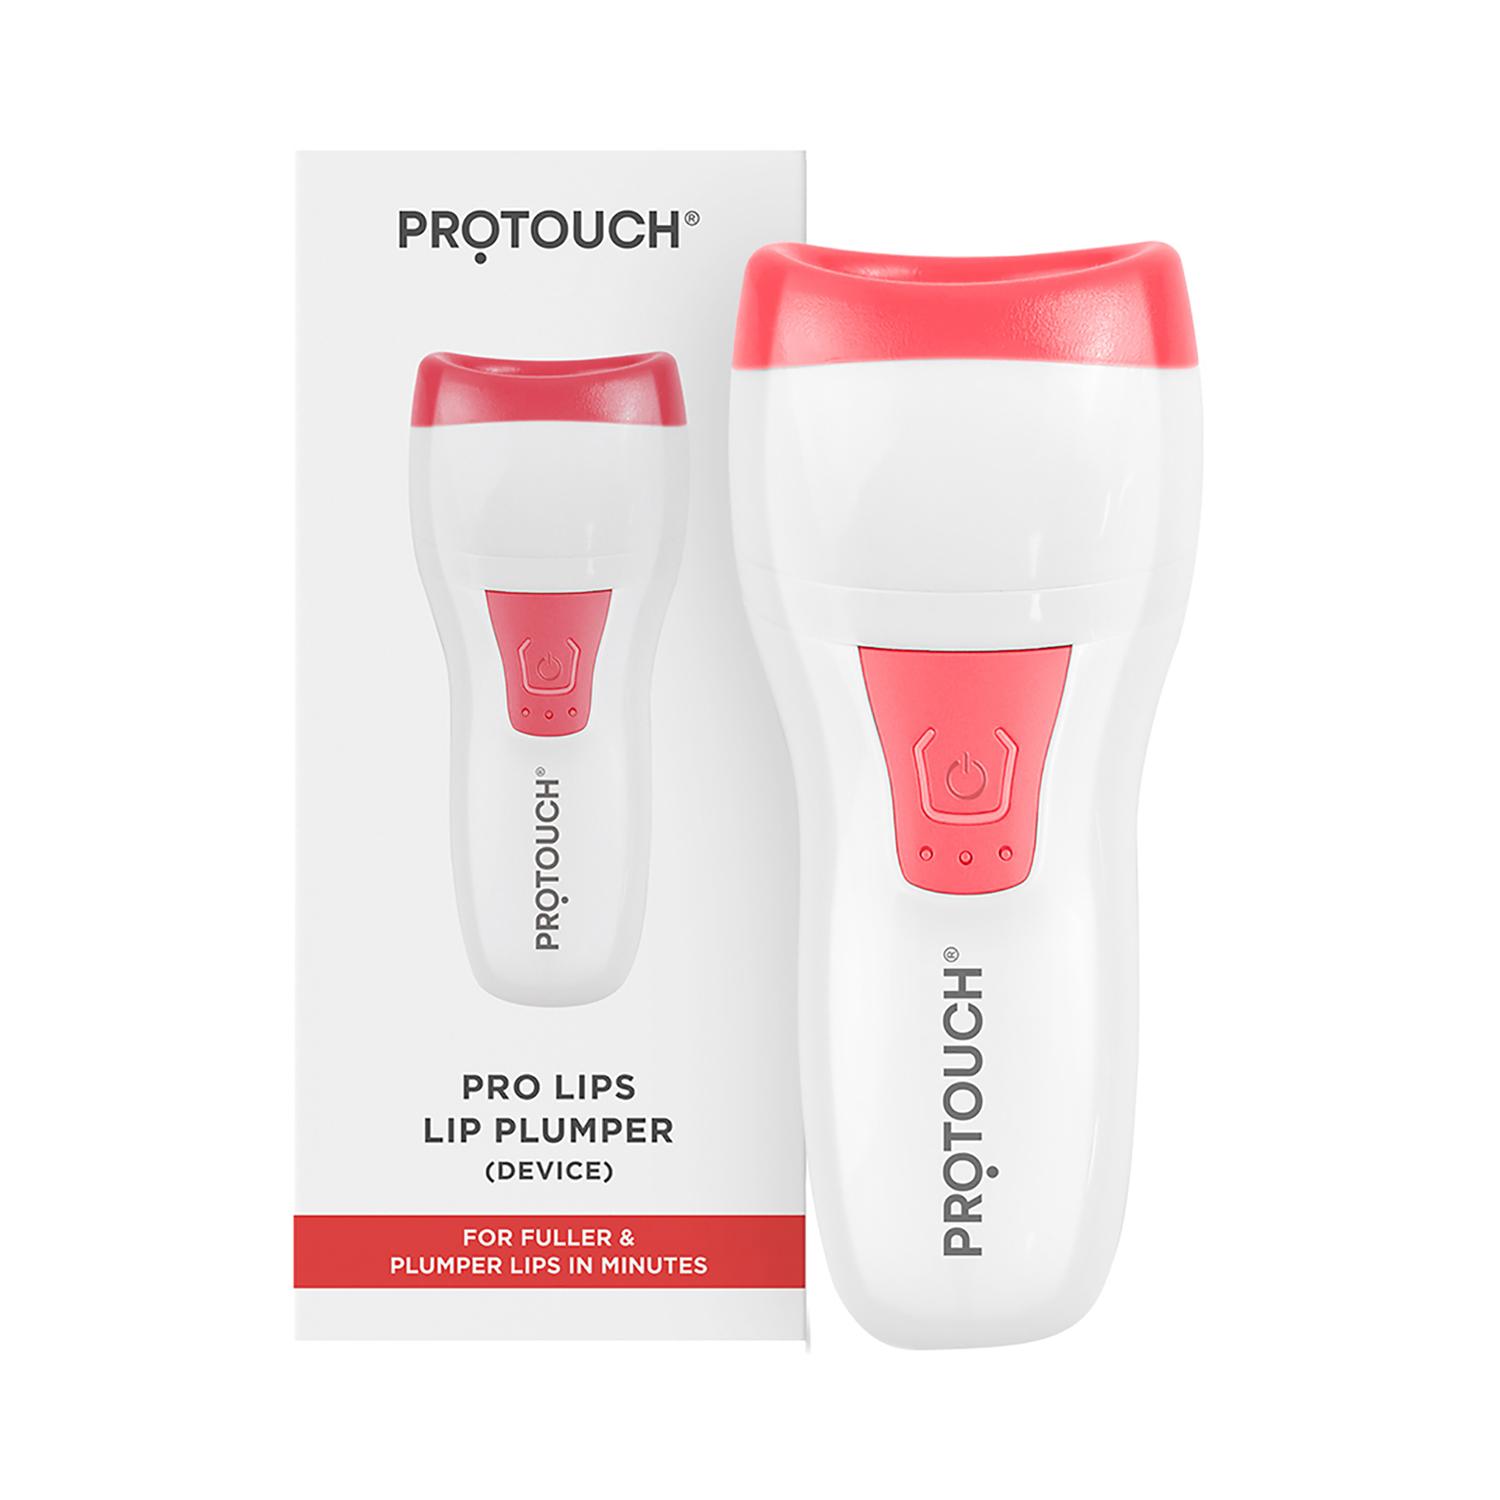 Protouch | Protouch Pro-lips Lip Plumper Device - Automatic, Smart, Safe & Effective Lip Plumping Solution